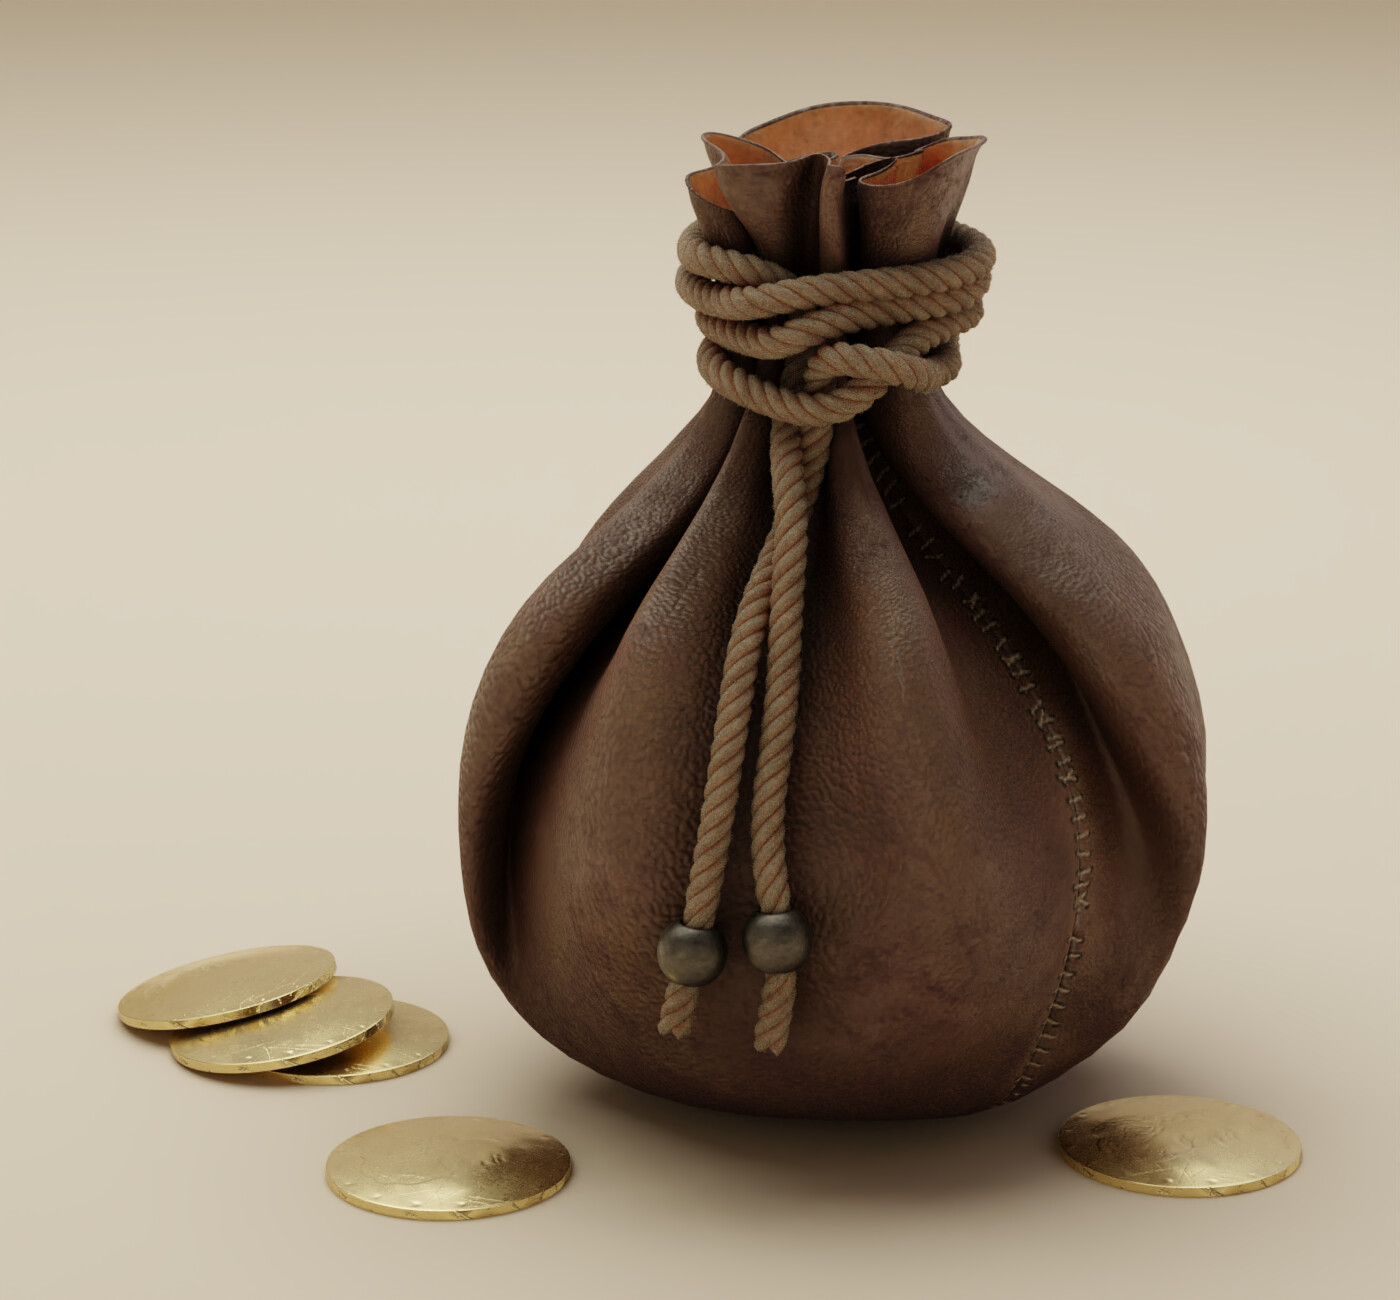 David Teglassy - Leather coin pouch 3D model